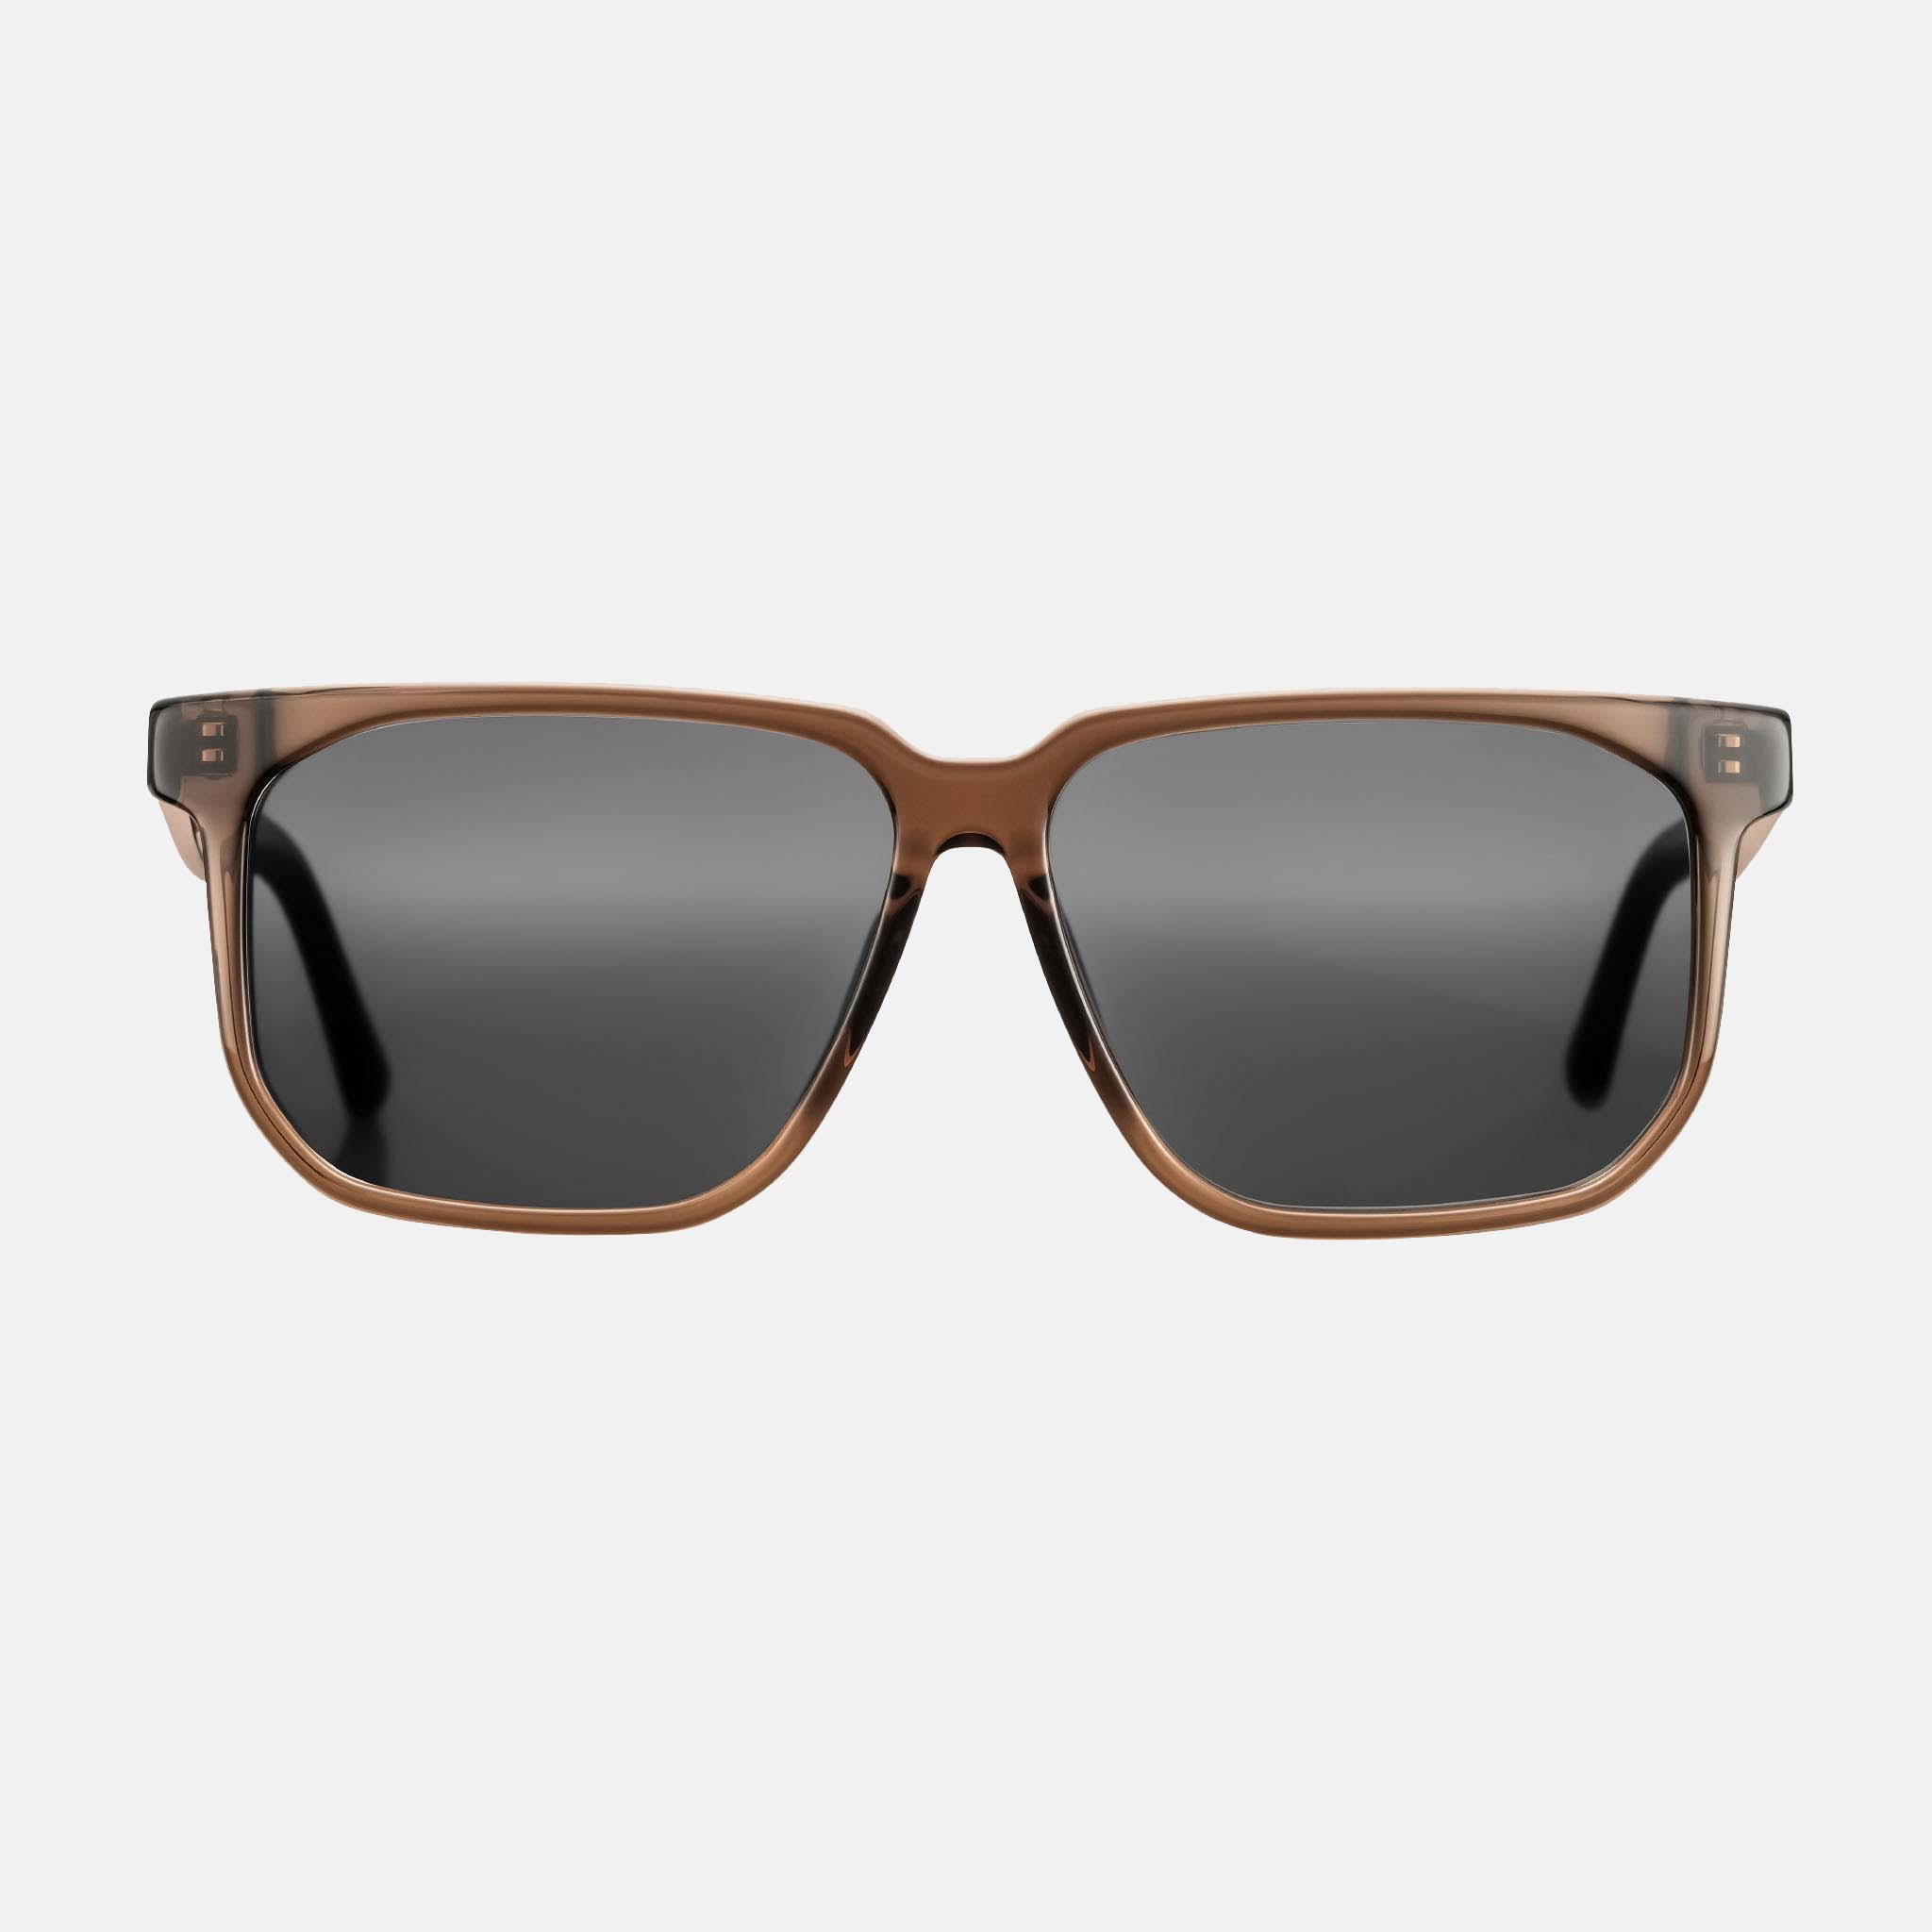 NUMBER 75 COFFE BROWN SUNNGLASSES SONNENBRILLE 2